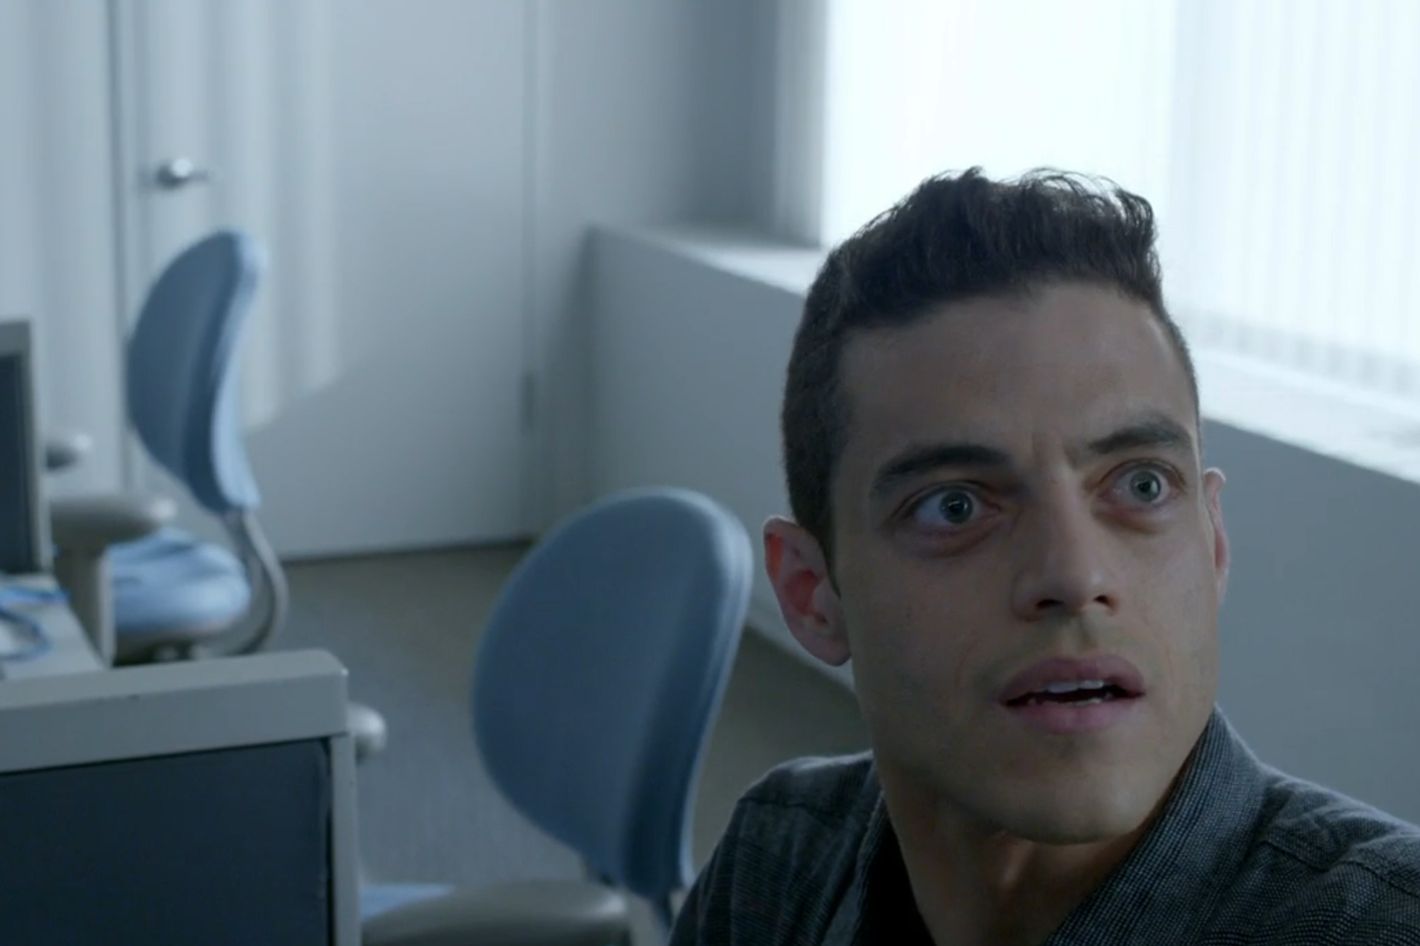 How Mr. Robot Became One of TV's Most Visually Striking Shows